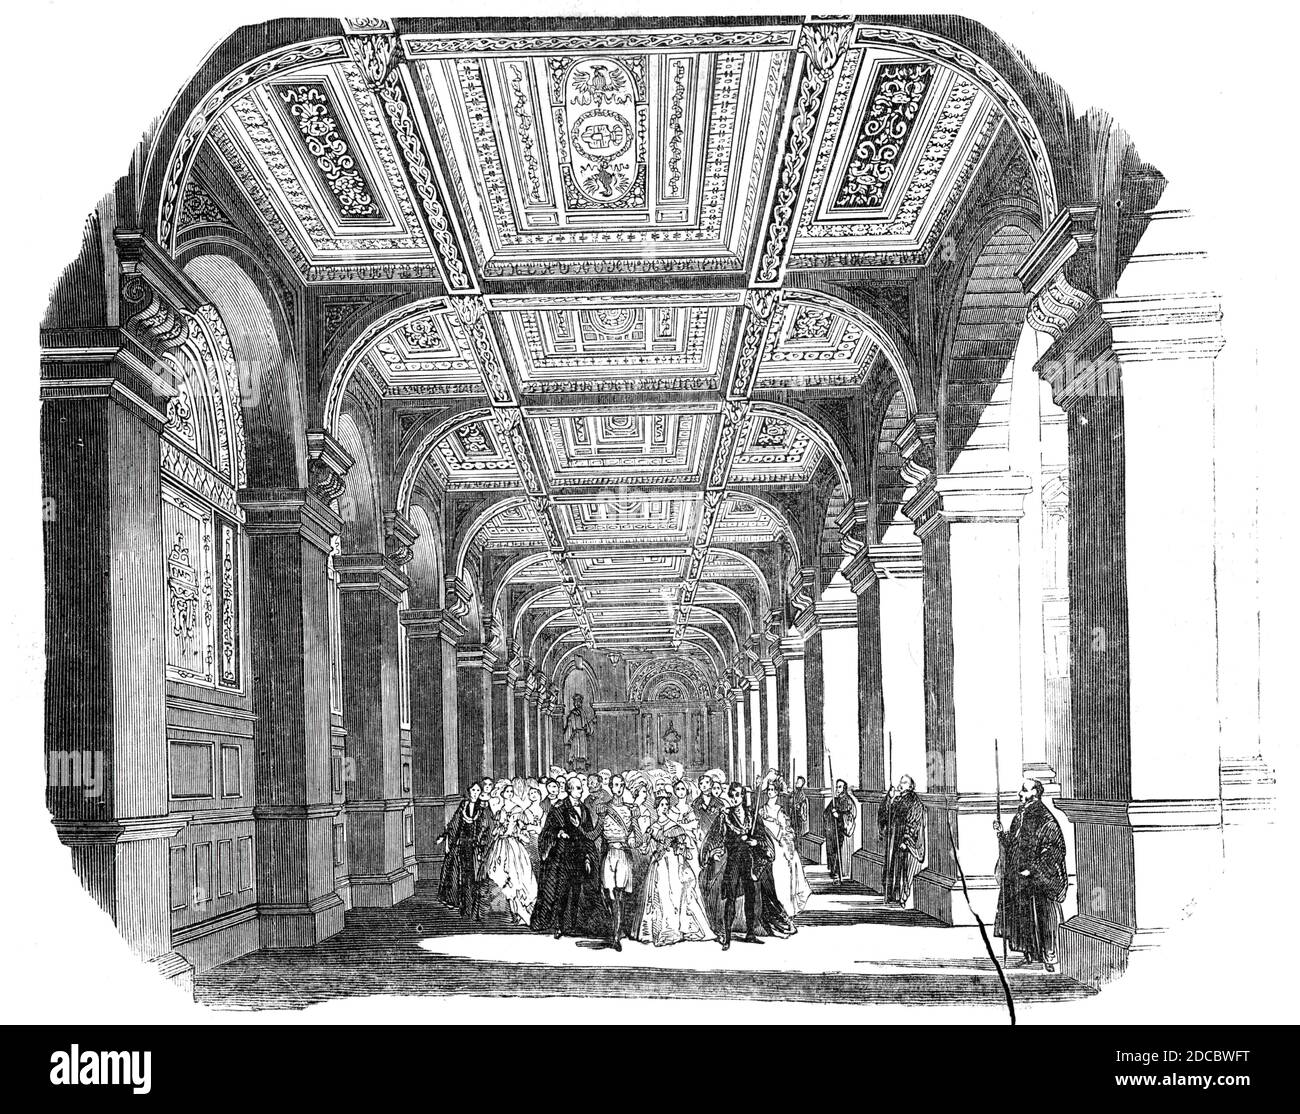 The Procession in the North Ambulatory, 1844. Opening of the new Royal Exchange building in the City of London. The building was designed by Sir William Tite and was officially opened by Queen Victoria. From &quot;Illustrated London News&quot;, 1844, Vol I. Stock Photo